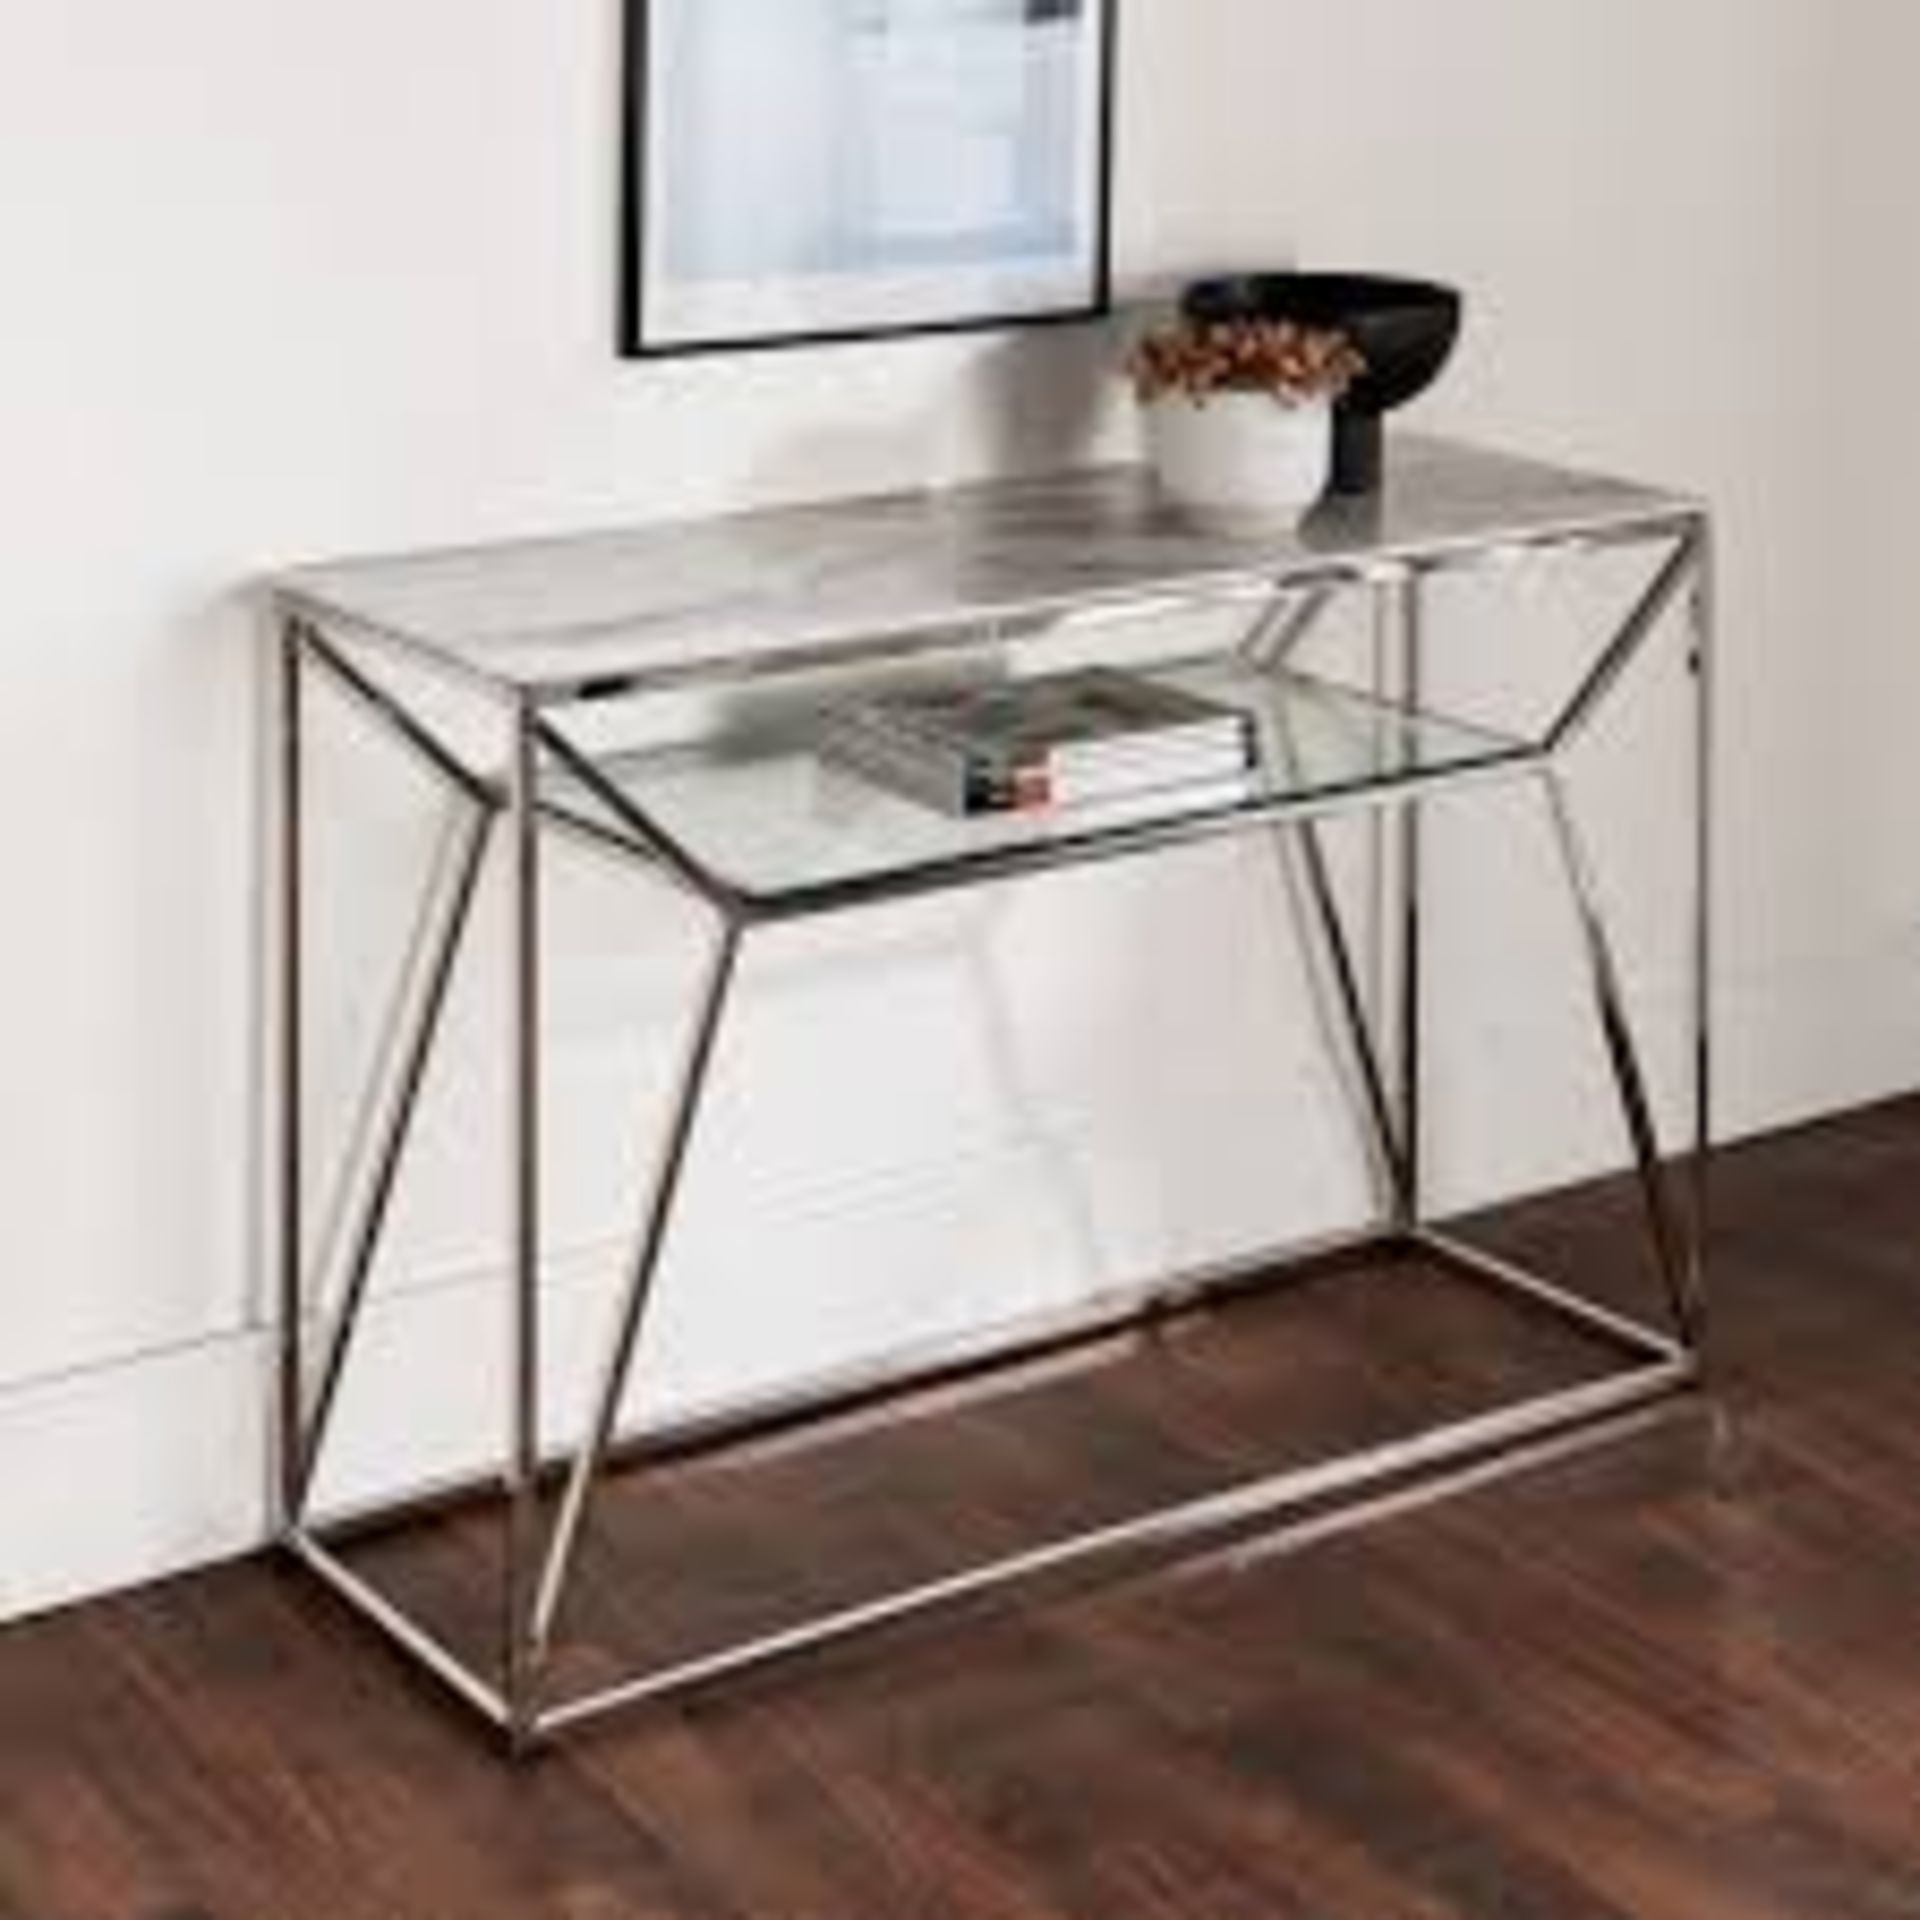 BRAND NEW NATIVE HOME MARBLE GLASS CONSOLE TABLE 120 X 40 X 78CM RRP £560